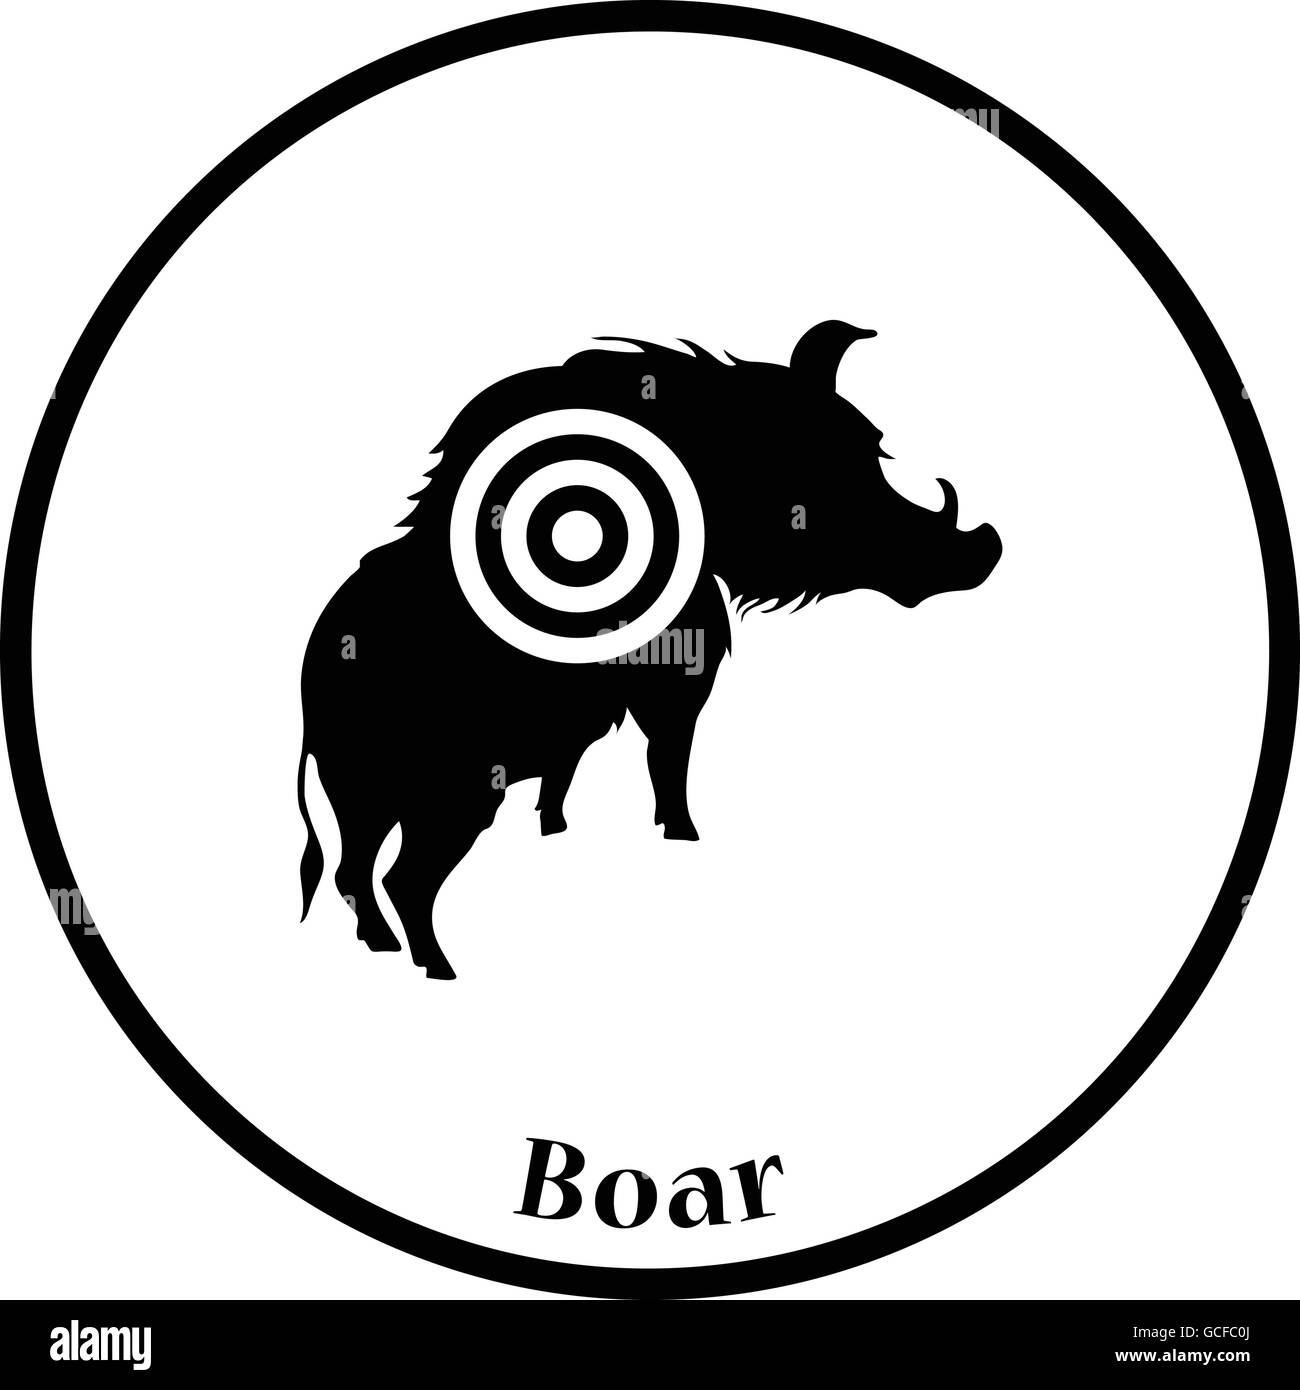 Boar silhouette with target icon. Thin circle design. Vector illustration. Stock Vector